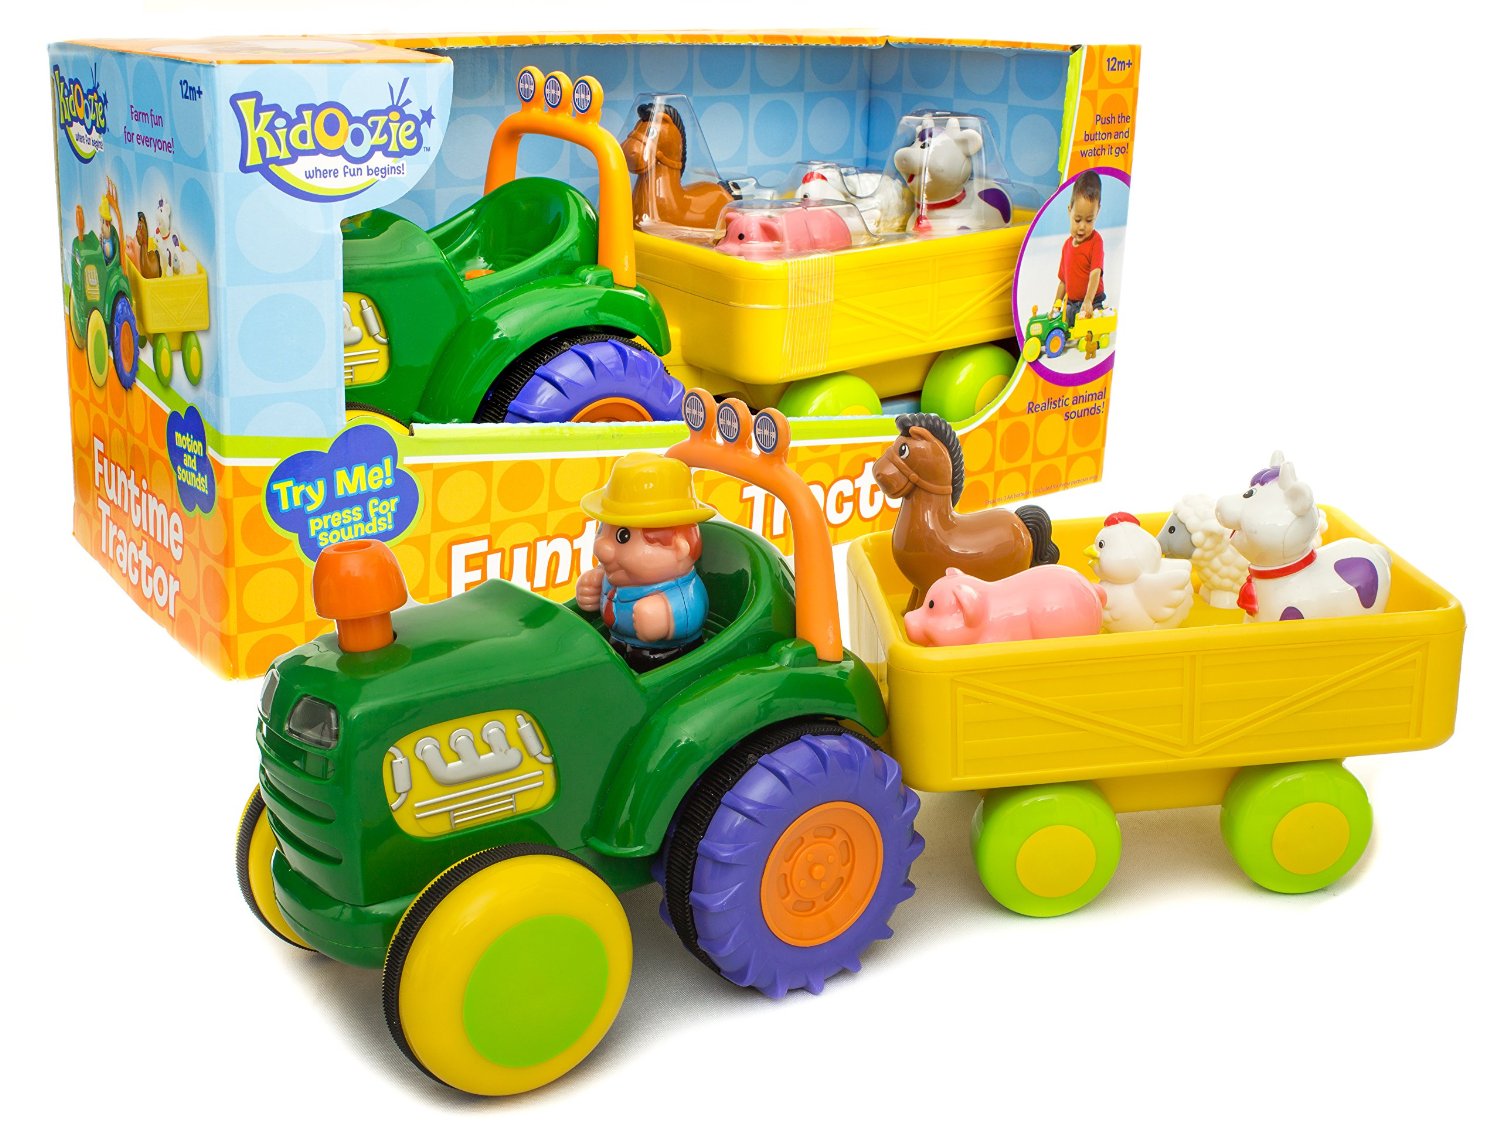 Kidoozie Funtime Tractor Only 27.92 (Reg. $35.99)